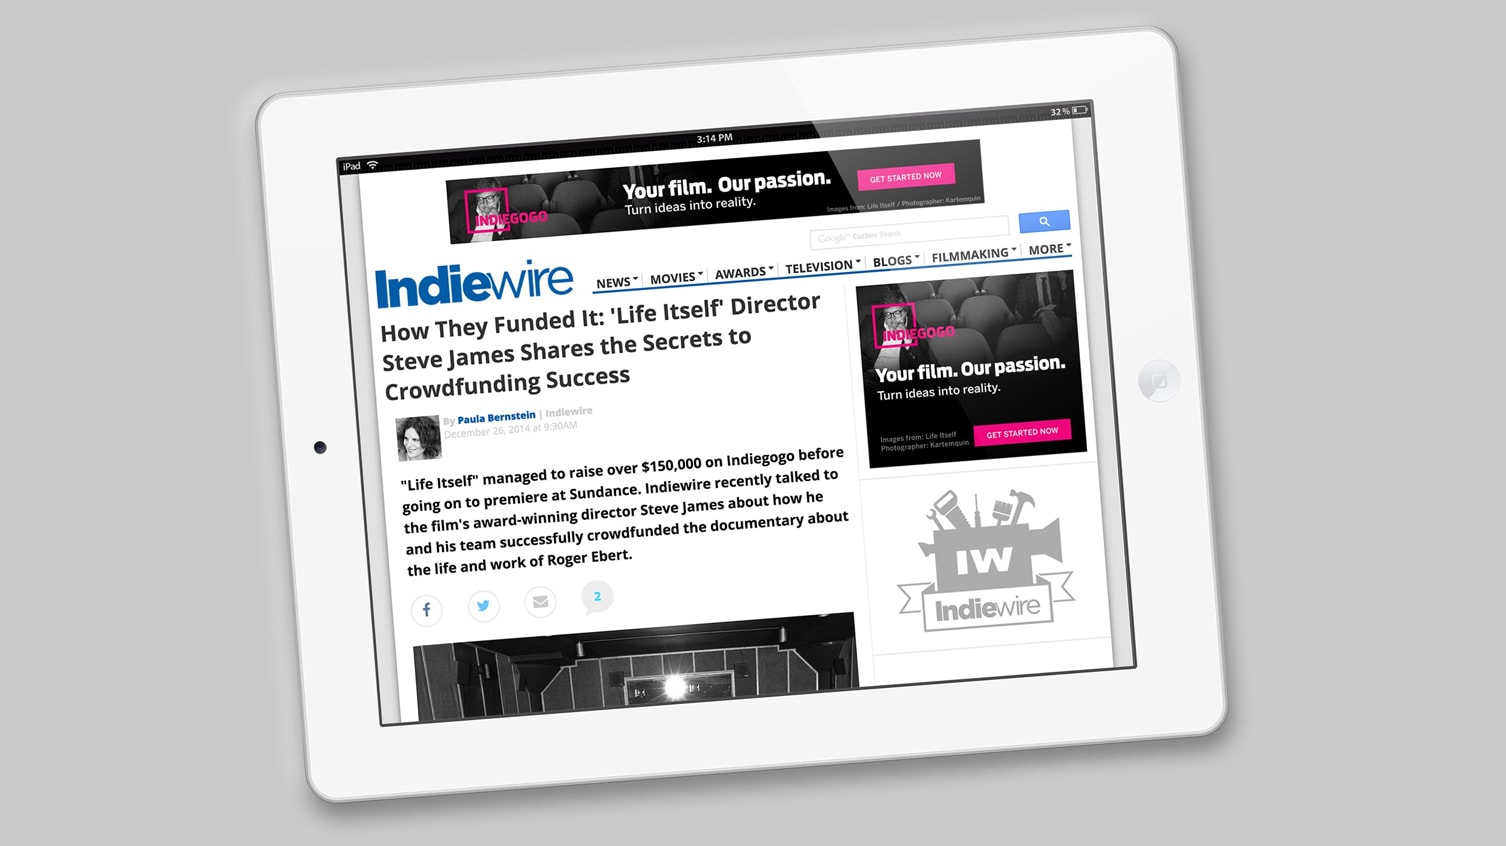 Photo of iPad showing advertising on the Indiewire website